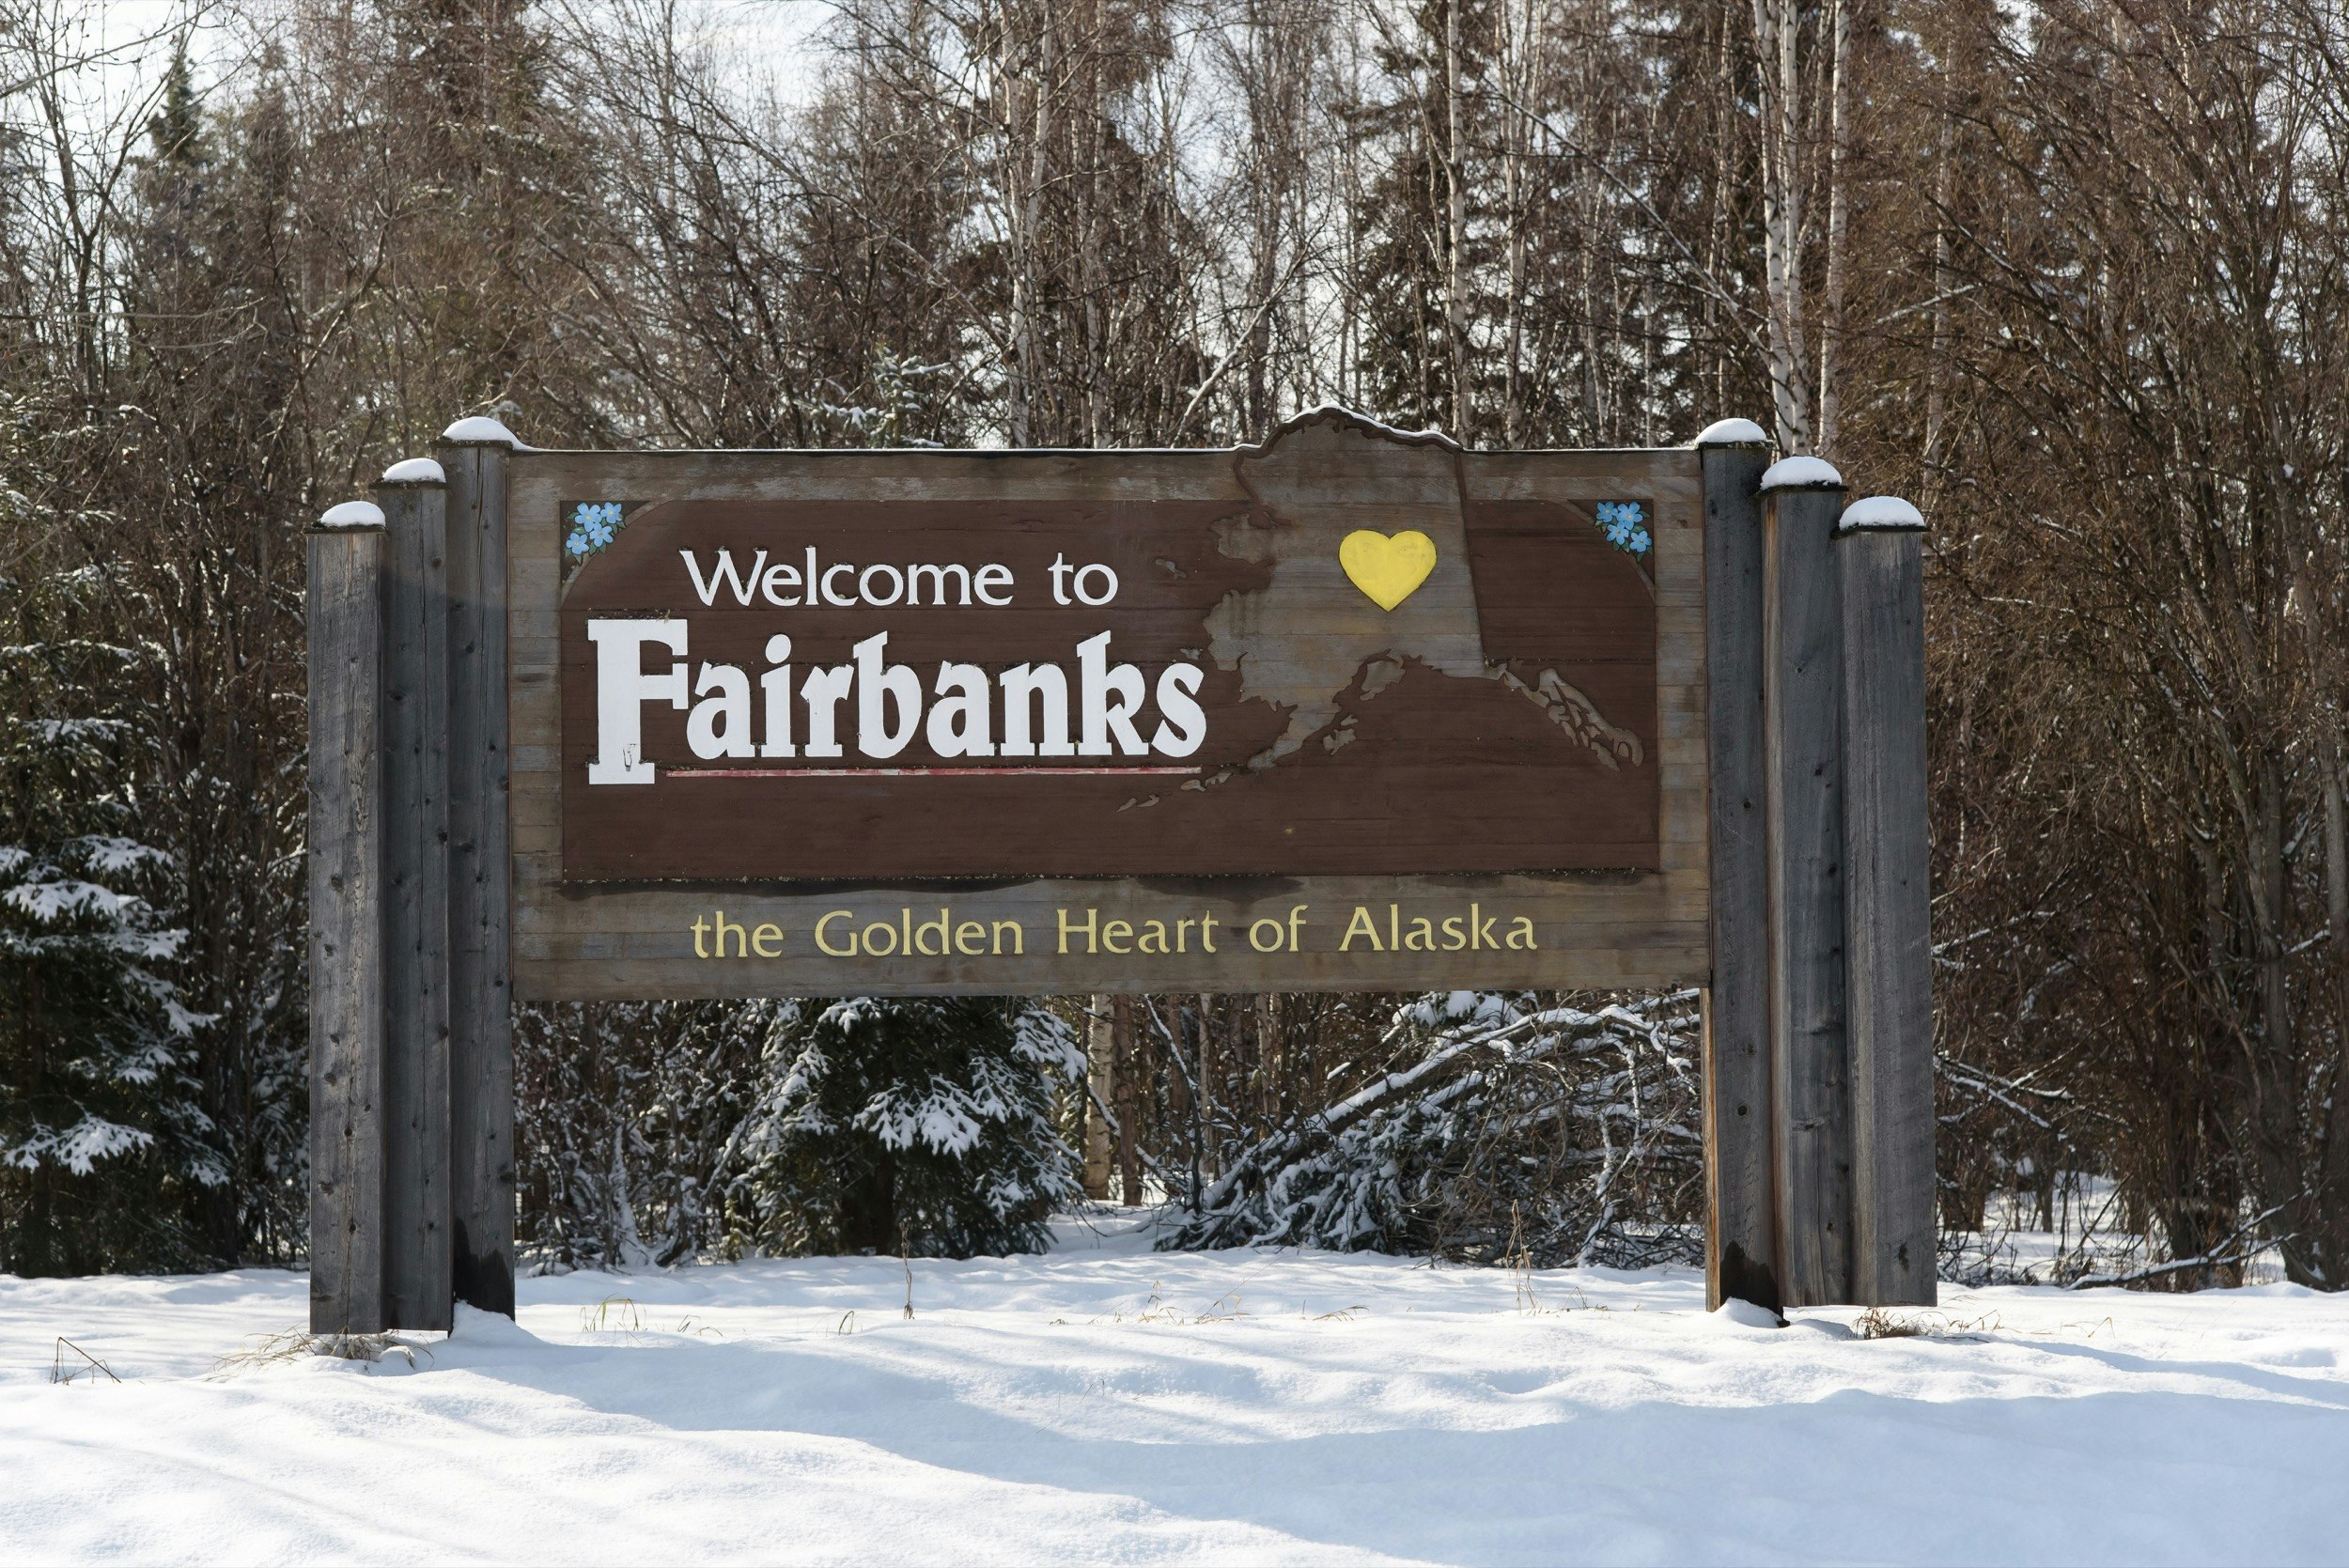 A wooden sign says welcome to Fairbanks, with a golden heart shape in the middle of an image of the state